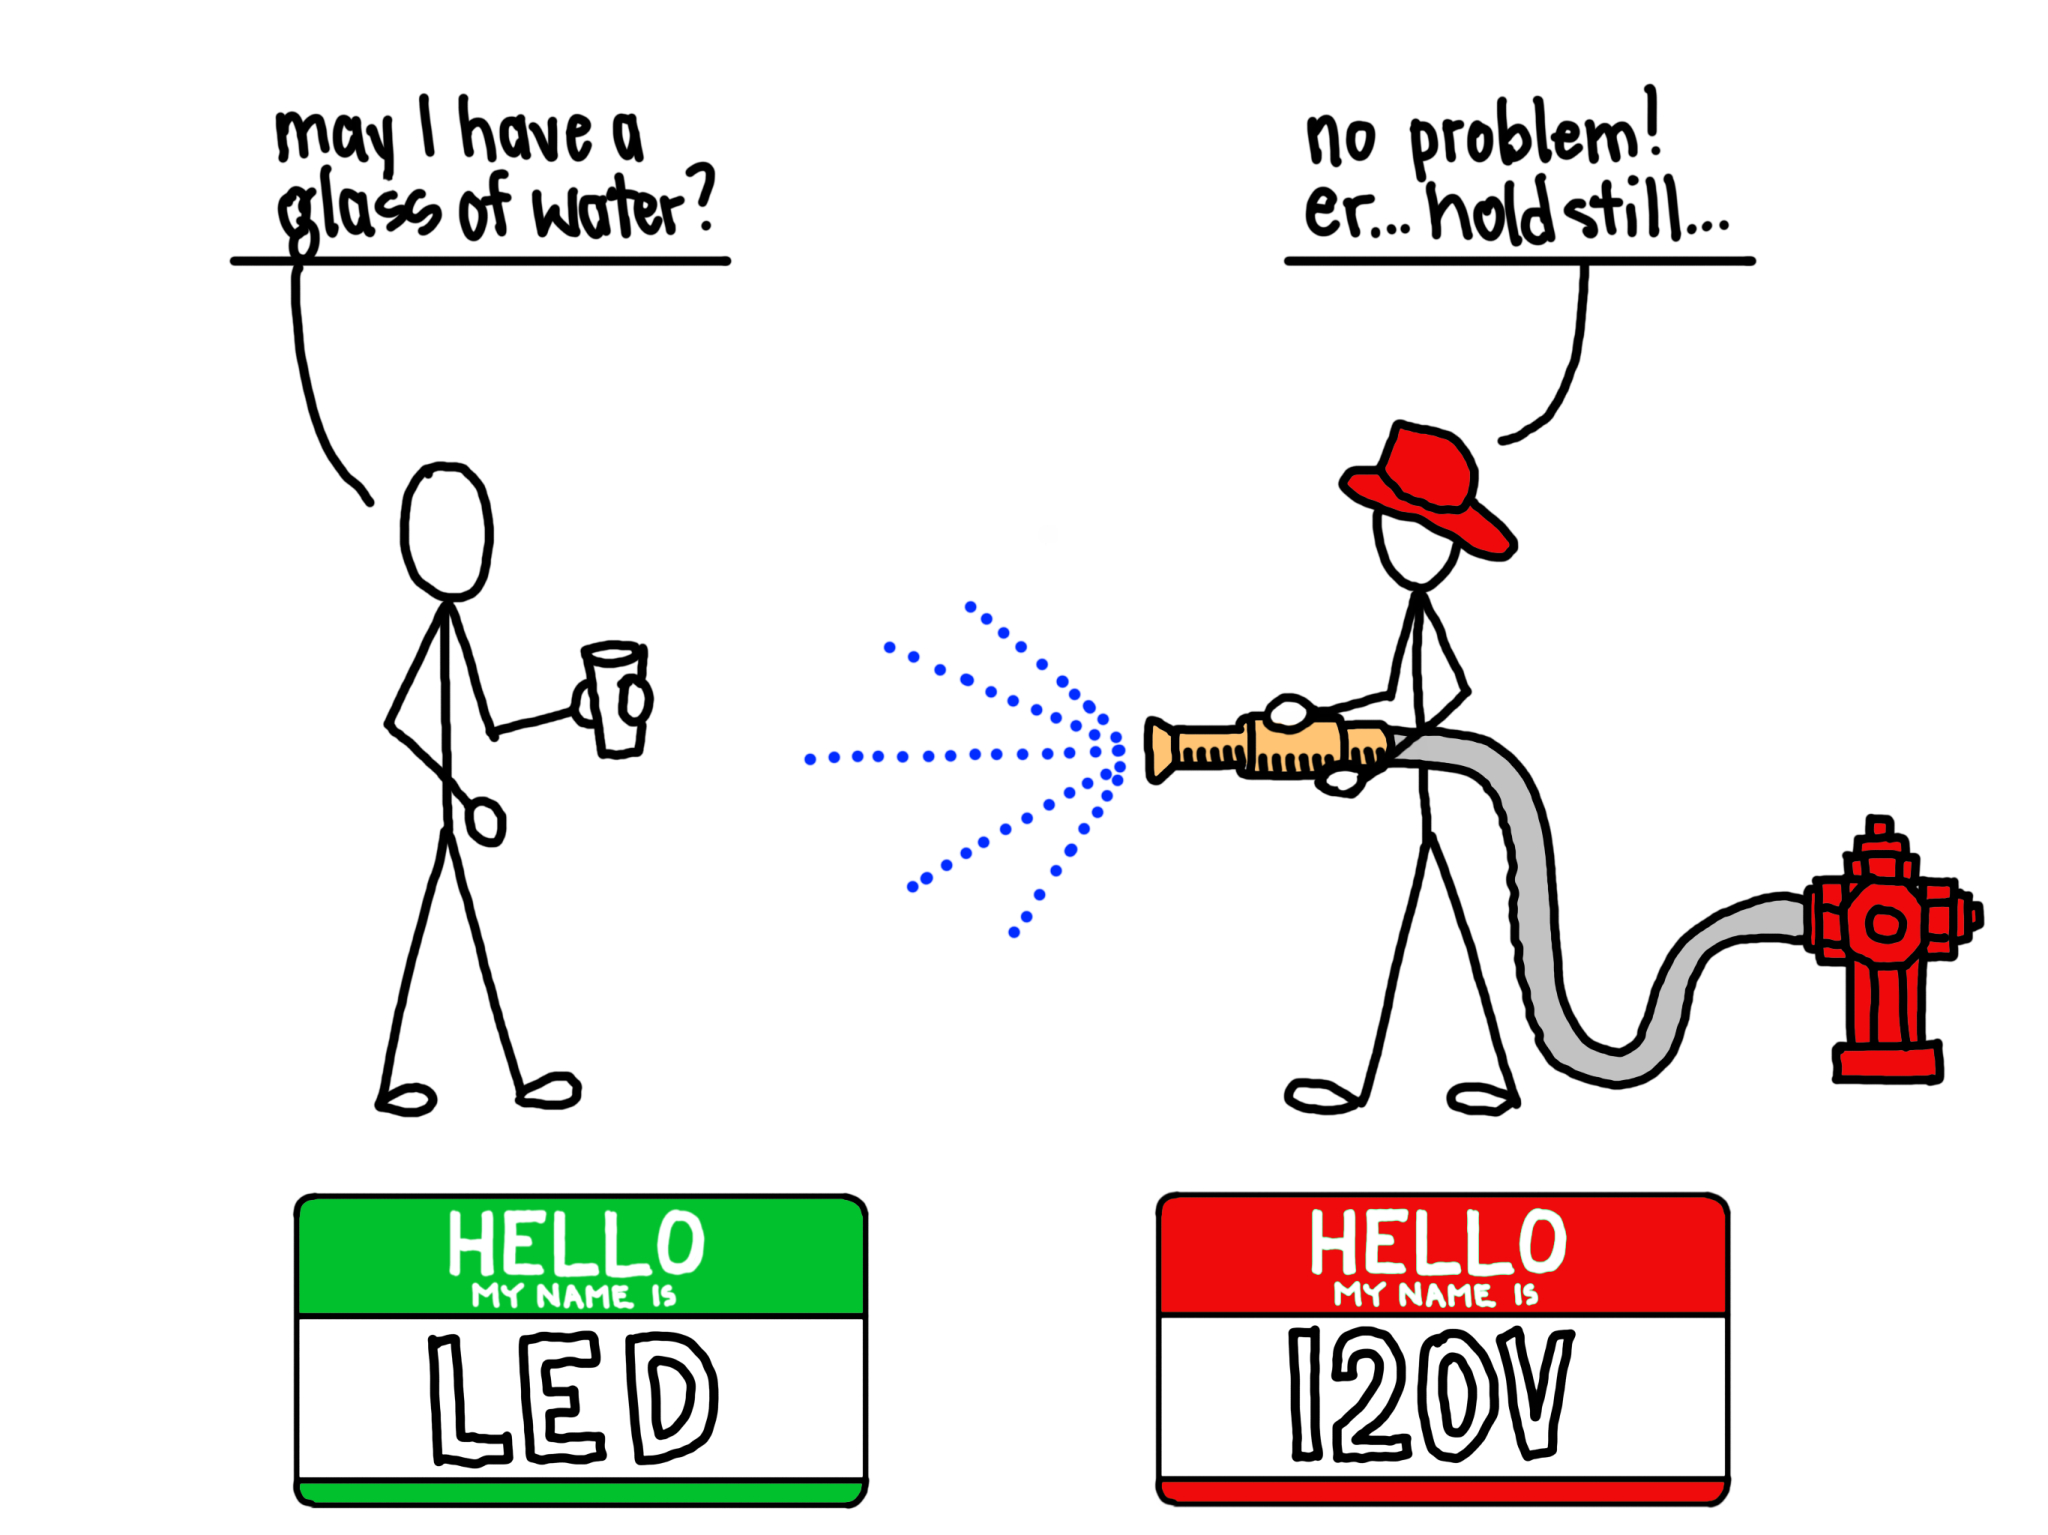 A cartoon of a stick figure labelled "LED" asking for a glass of water and another stick figure labelled "120W" offering water from a fire hose